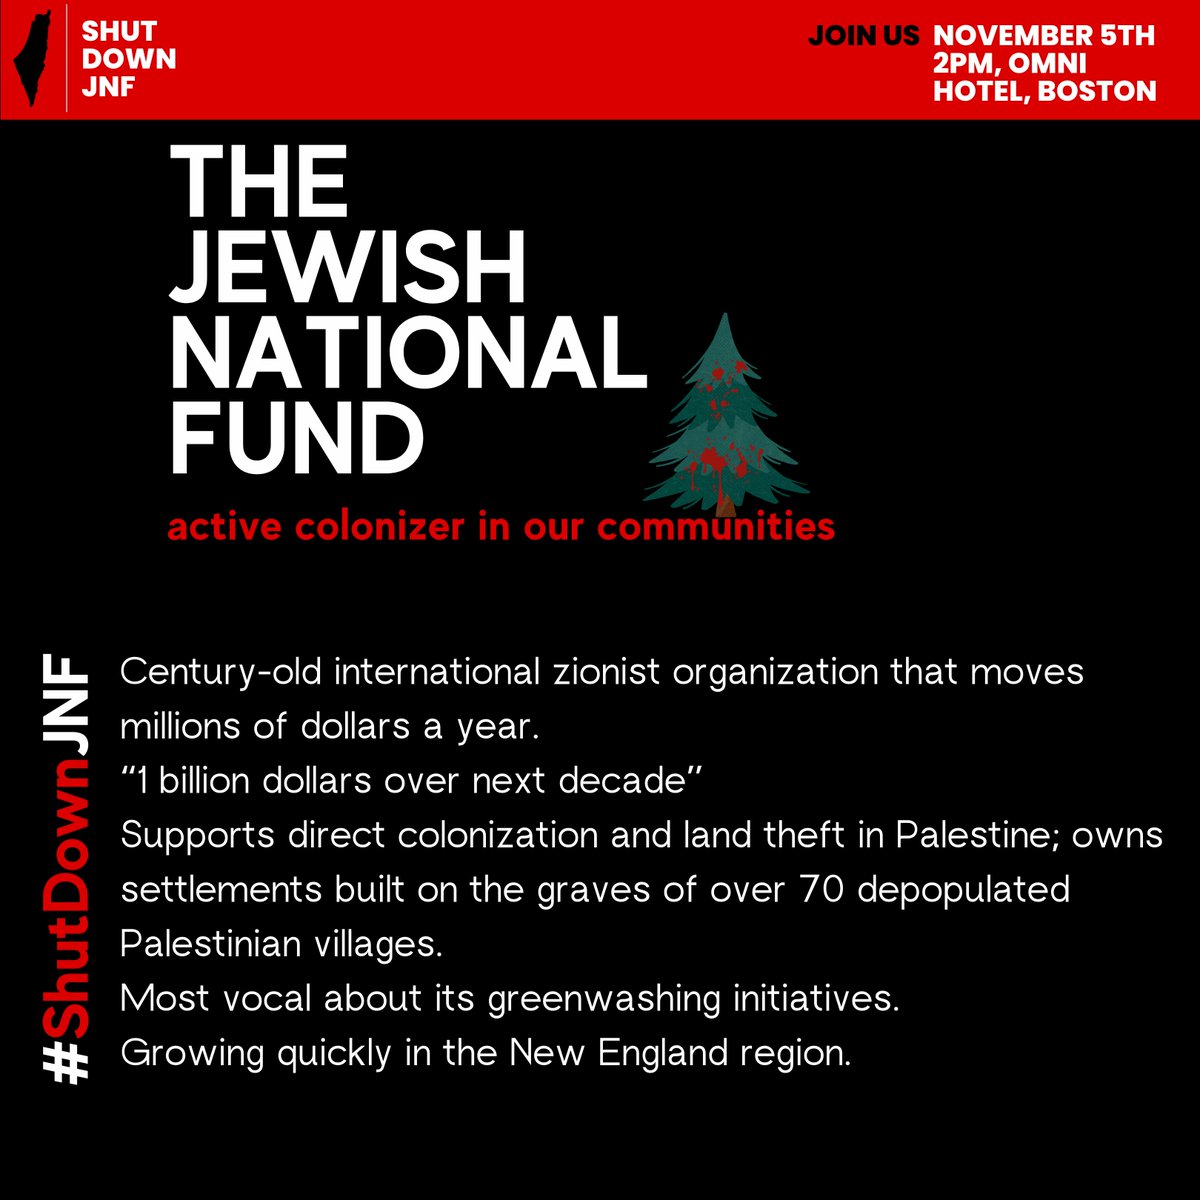 Learn about the JNF, an active colonizer in our communities who is holding a colonial conference in our city of Boston in just a few days. Join us at 2:00 p.m. on November 5th in front of the Omni Hotel to shut it down! #ShutDownJNF [1/10]